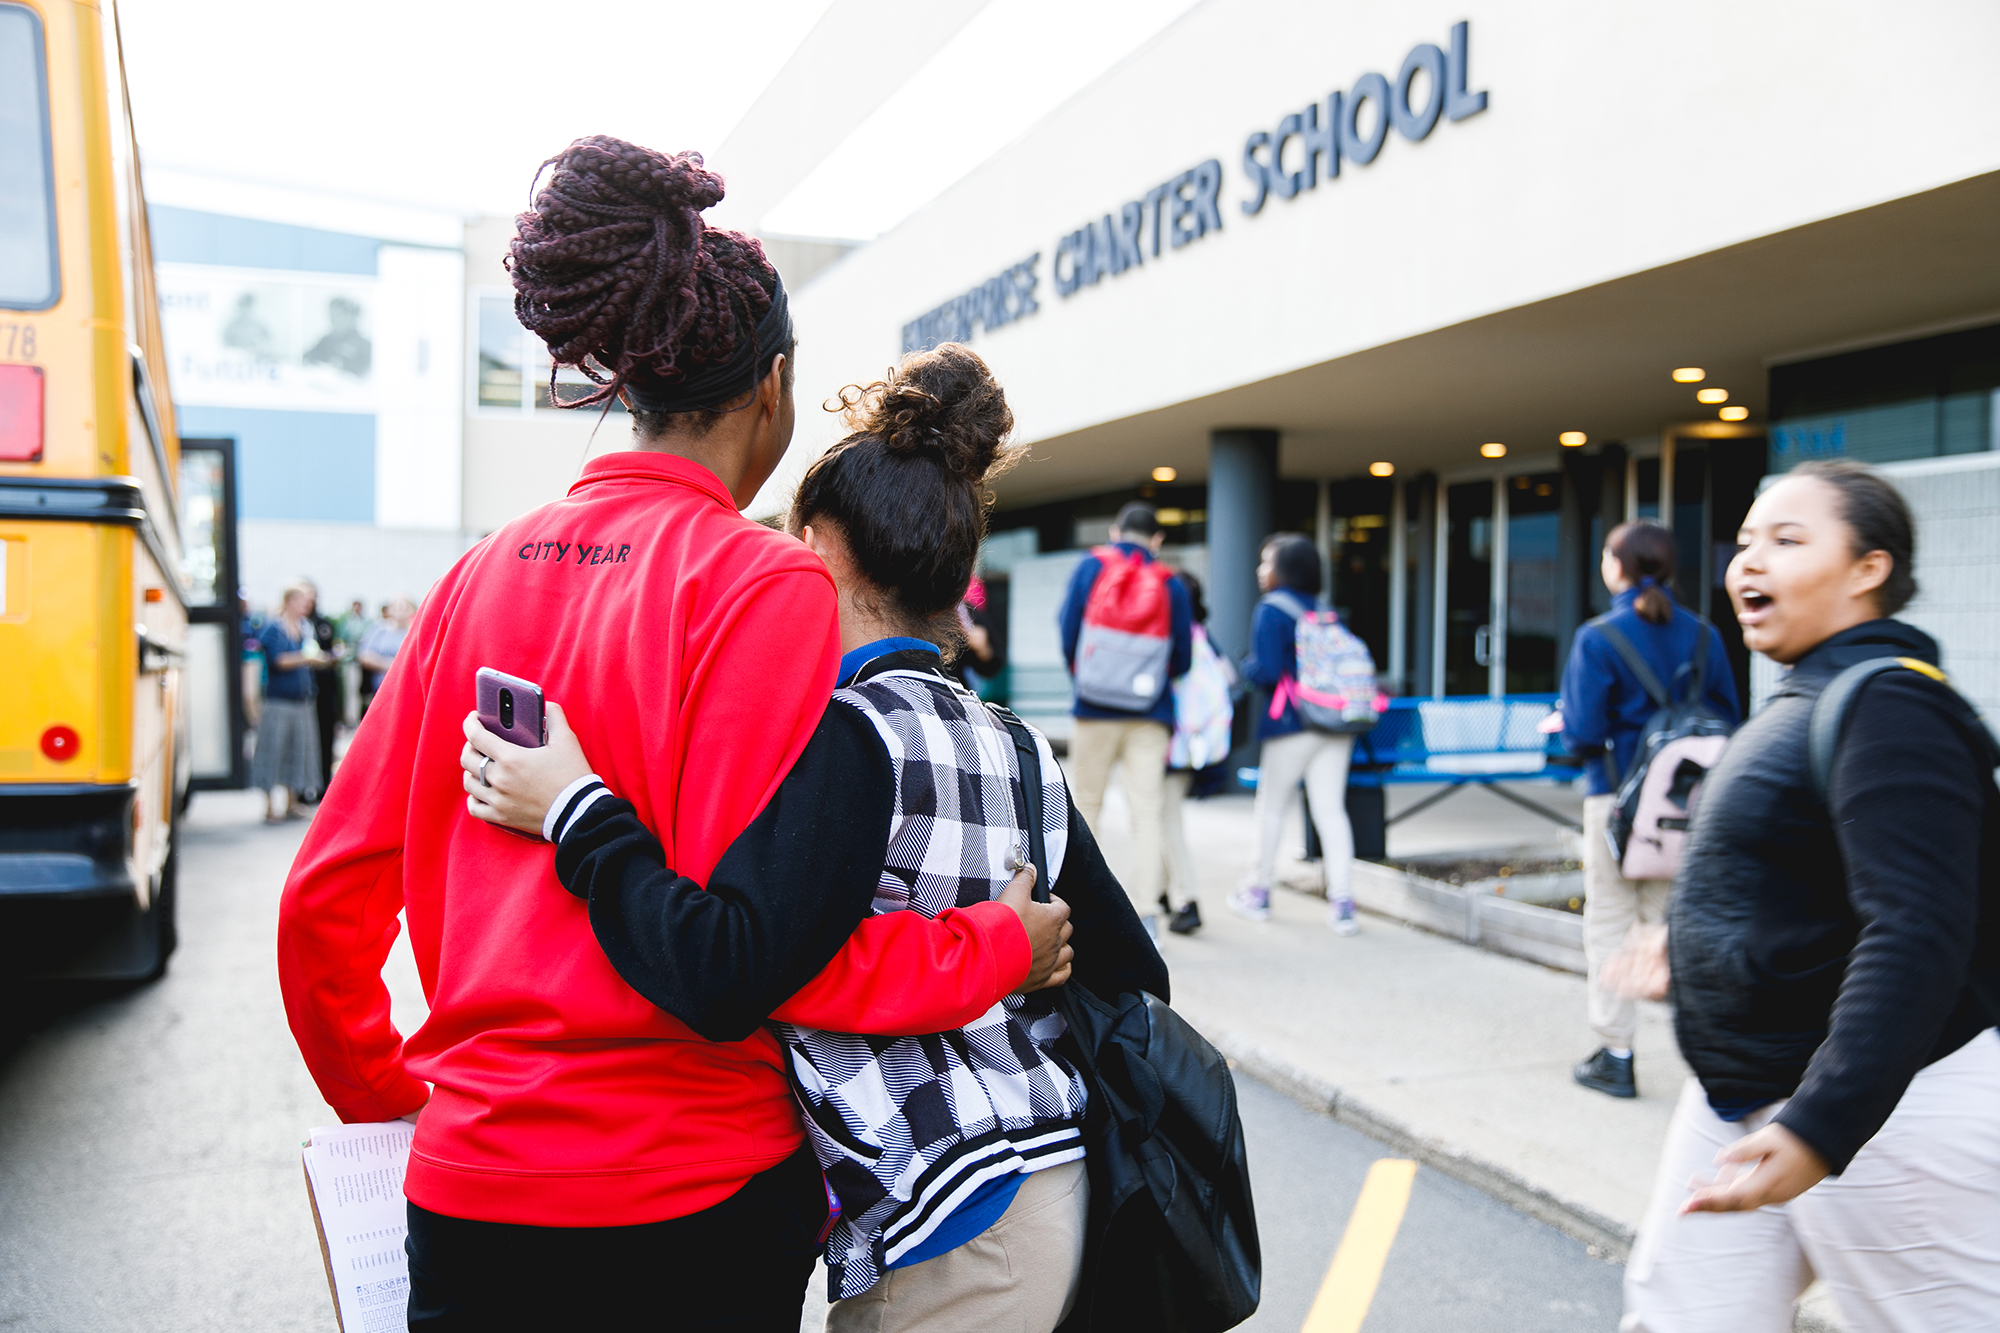 americorps volunteer and student hugging in front of enterprise charter school